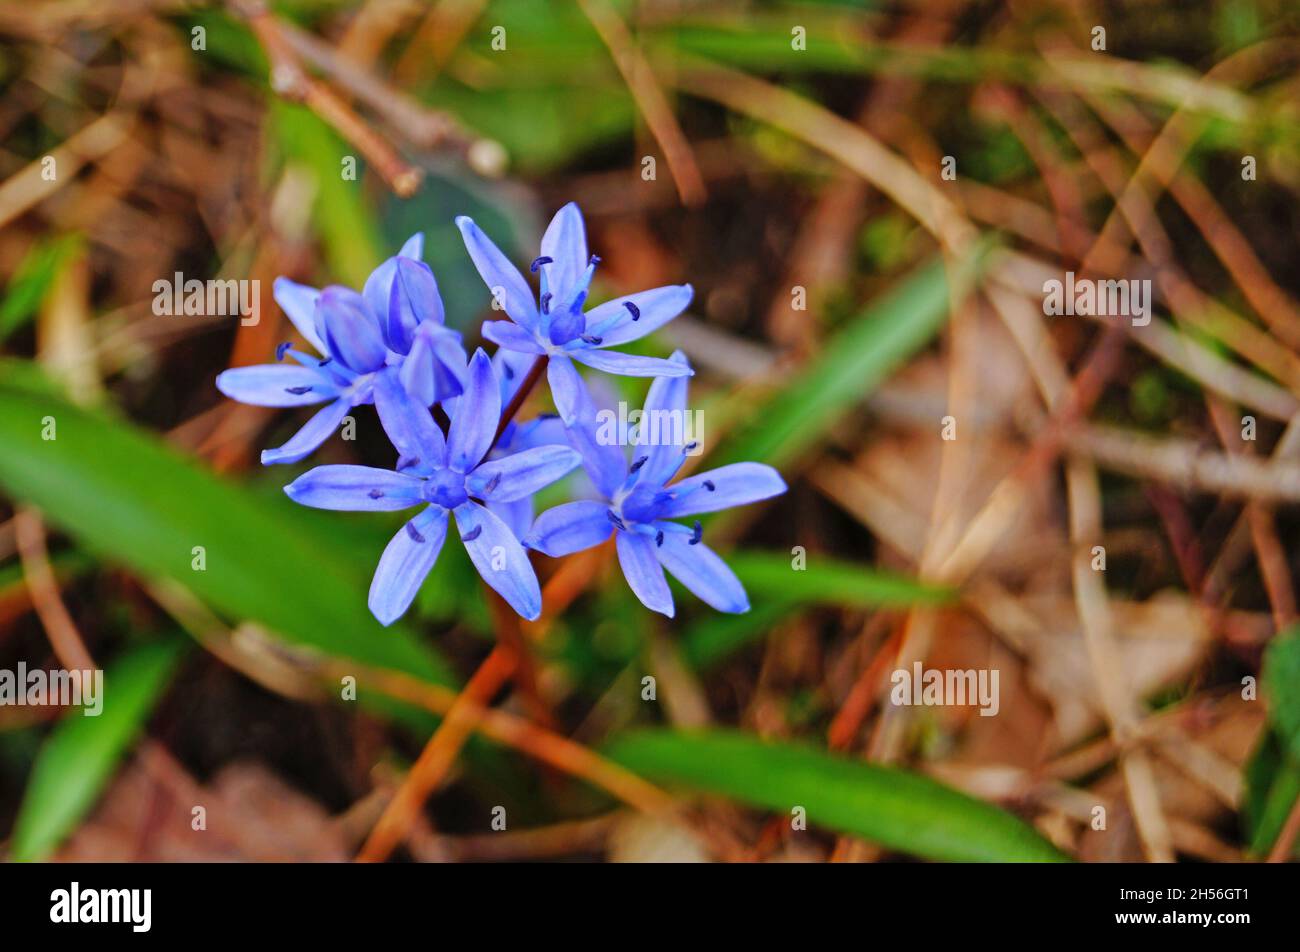 Scílla flowers with delicate blue petals on a stem with green leaves in a meadow on a sunny spring day Stock Photo